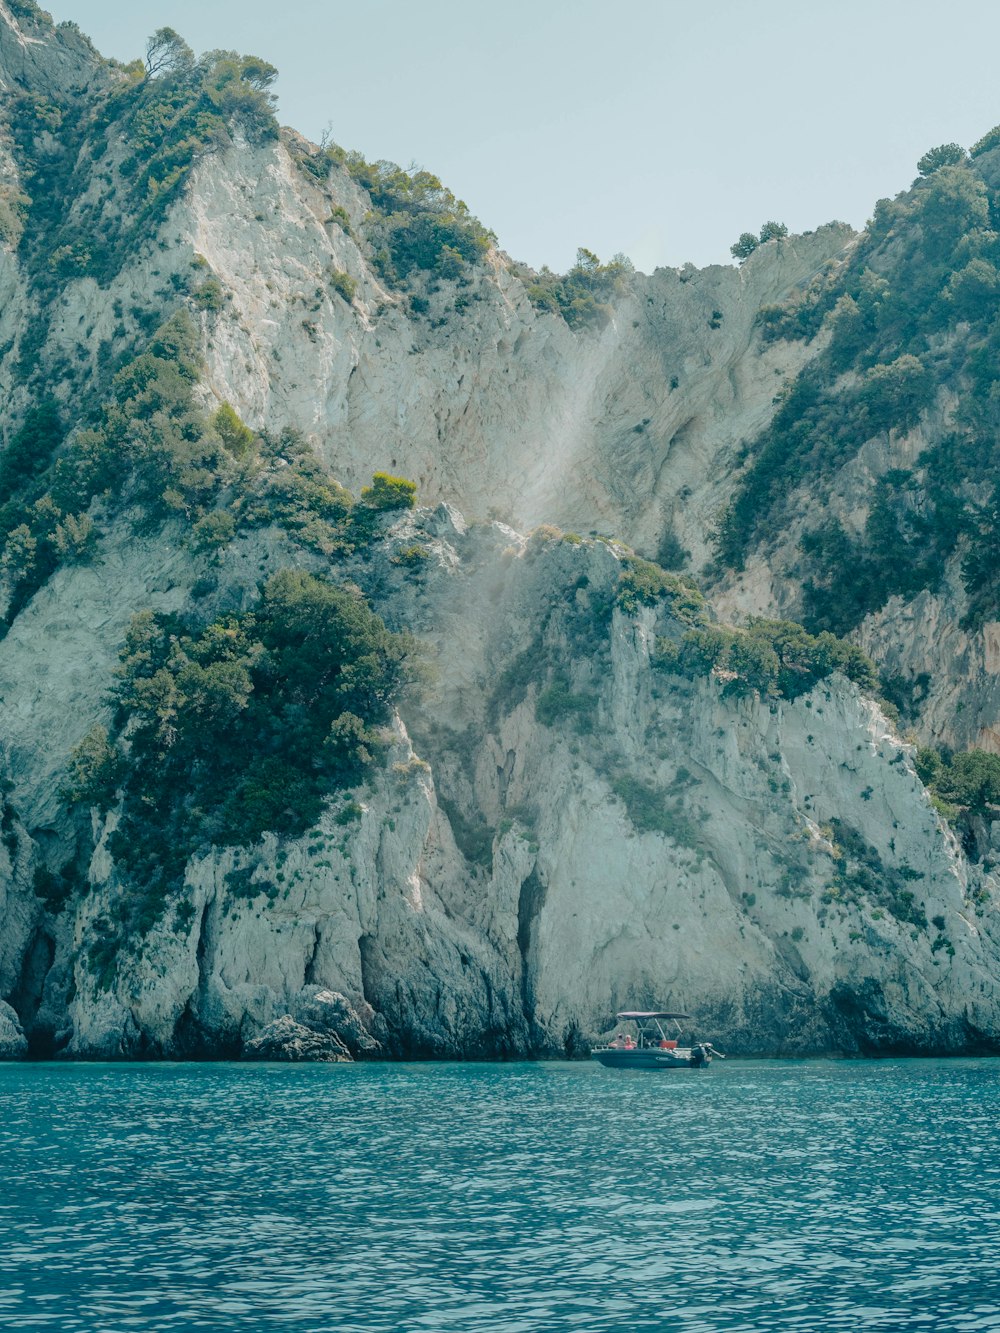 a boat in a body of water near a mountain